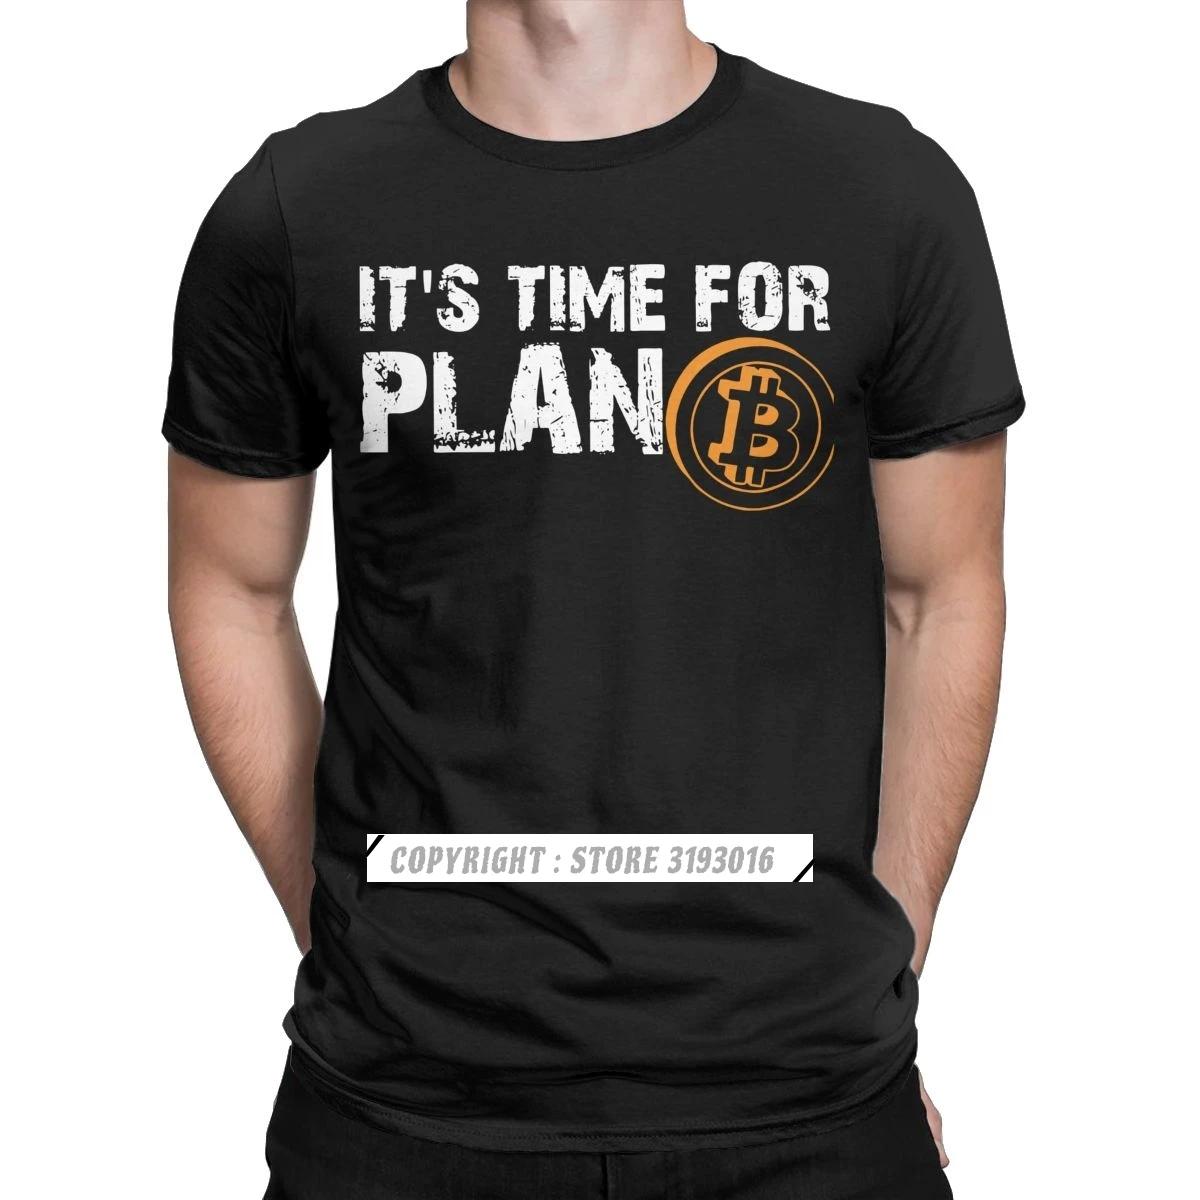  Its Time For Plan B Bitcoin BTC Crypto Currency T  Cryptocurrency Blockchain ũ Ƽ Drop Ship